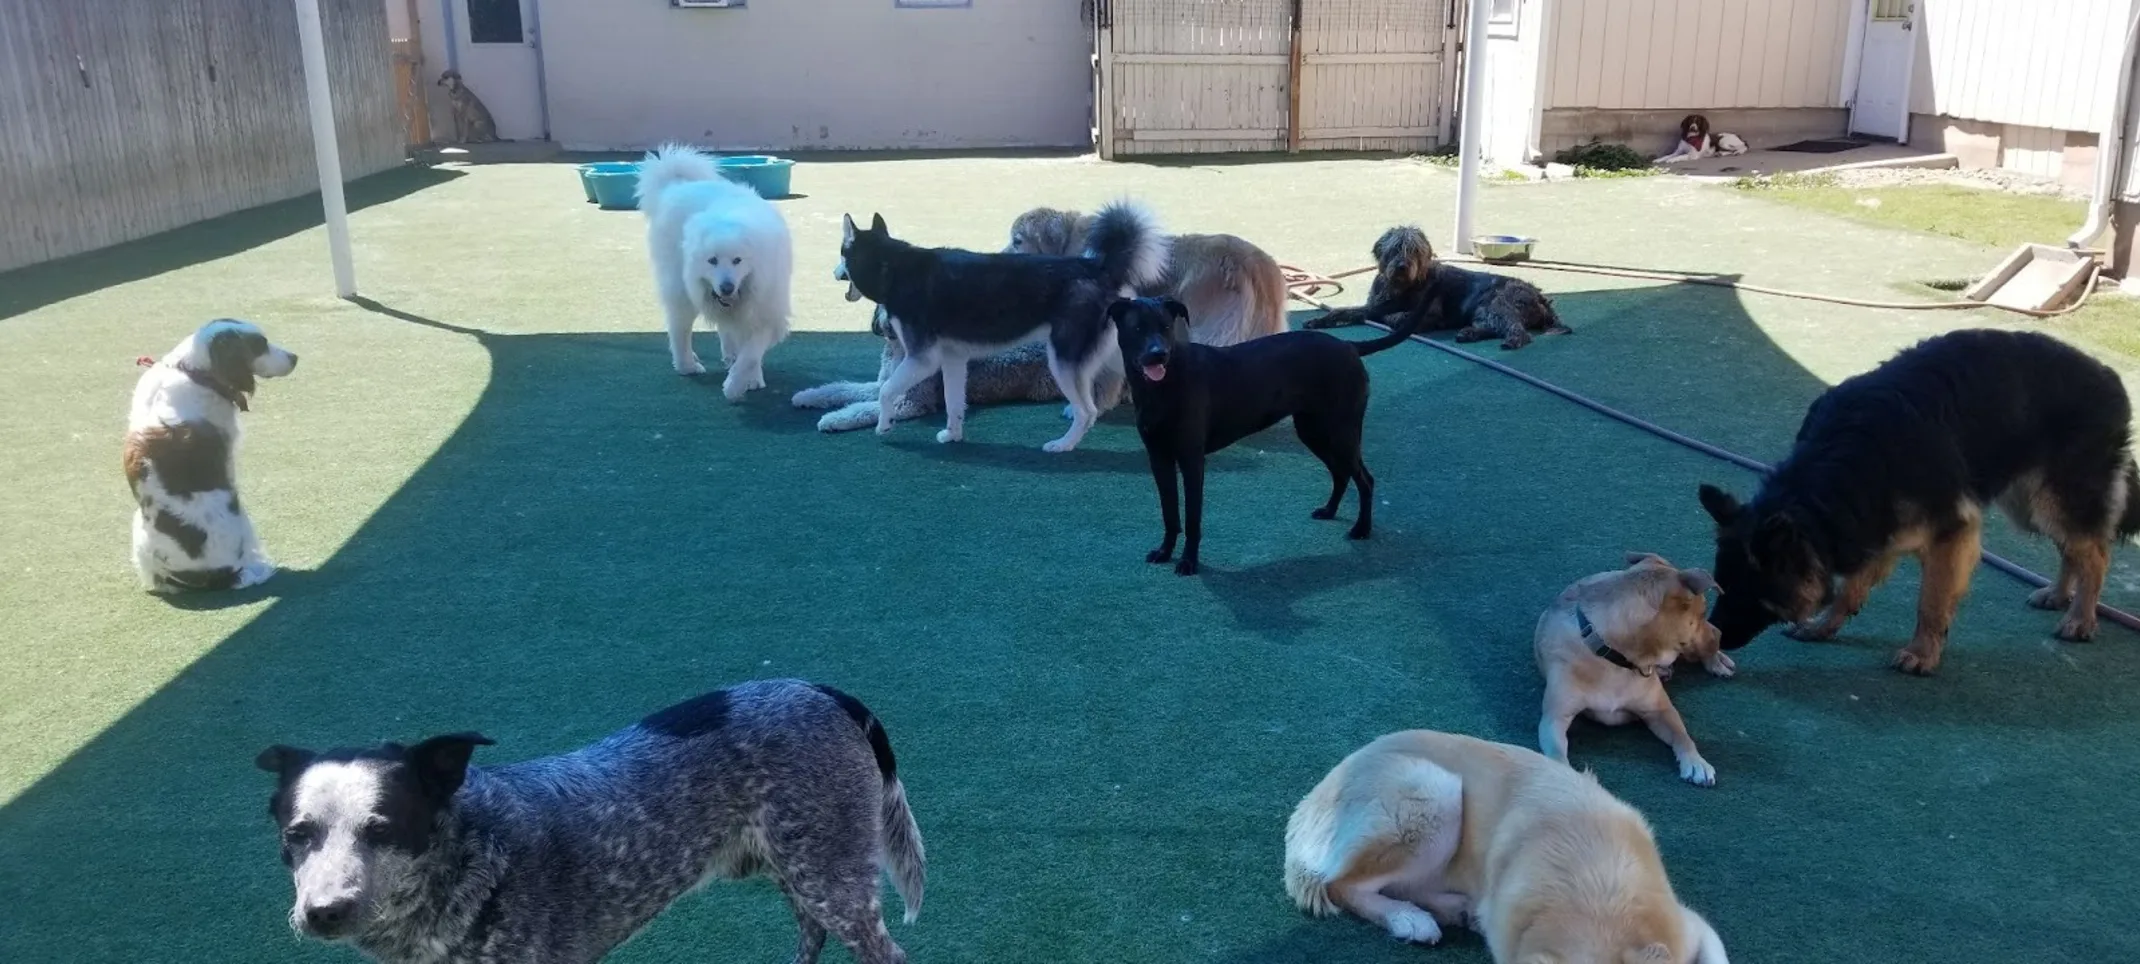 Many Dogs Outside in a Yard